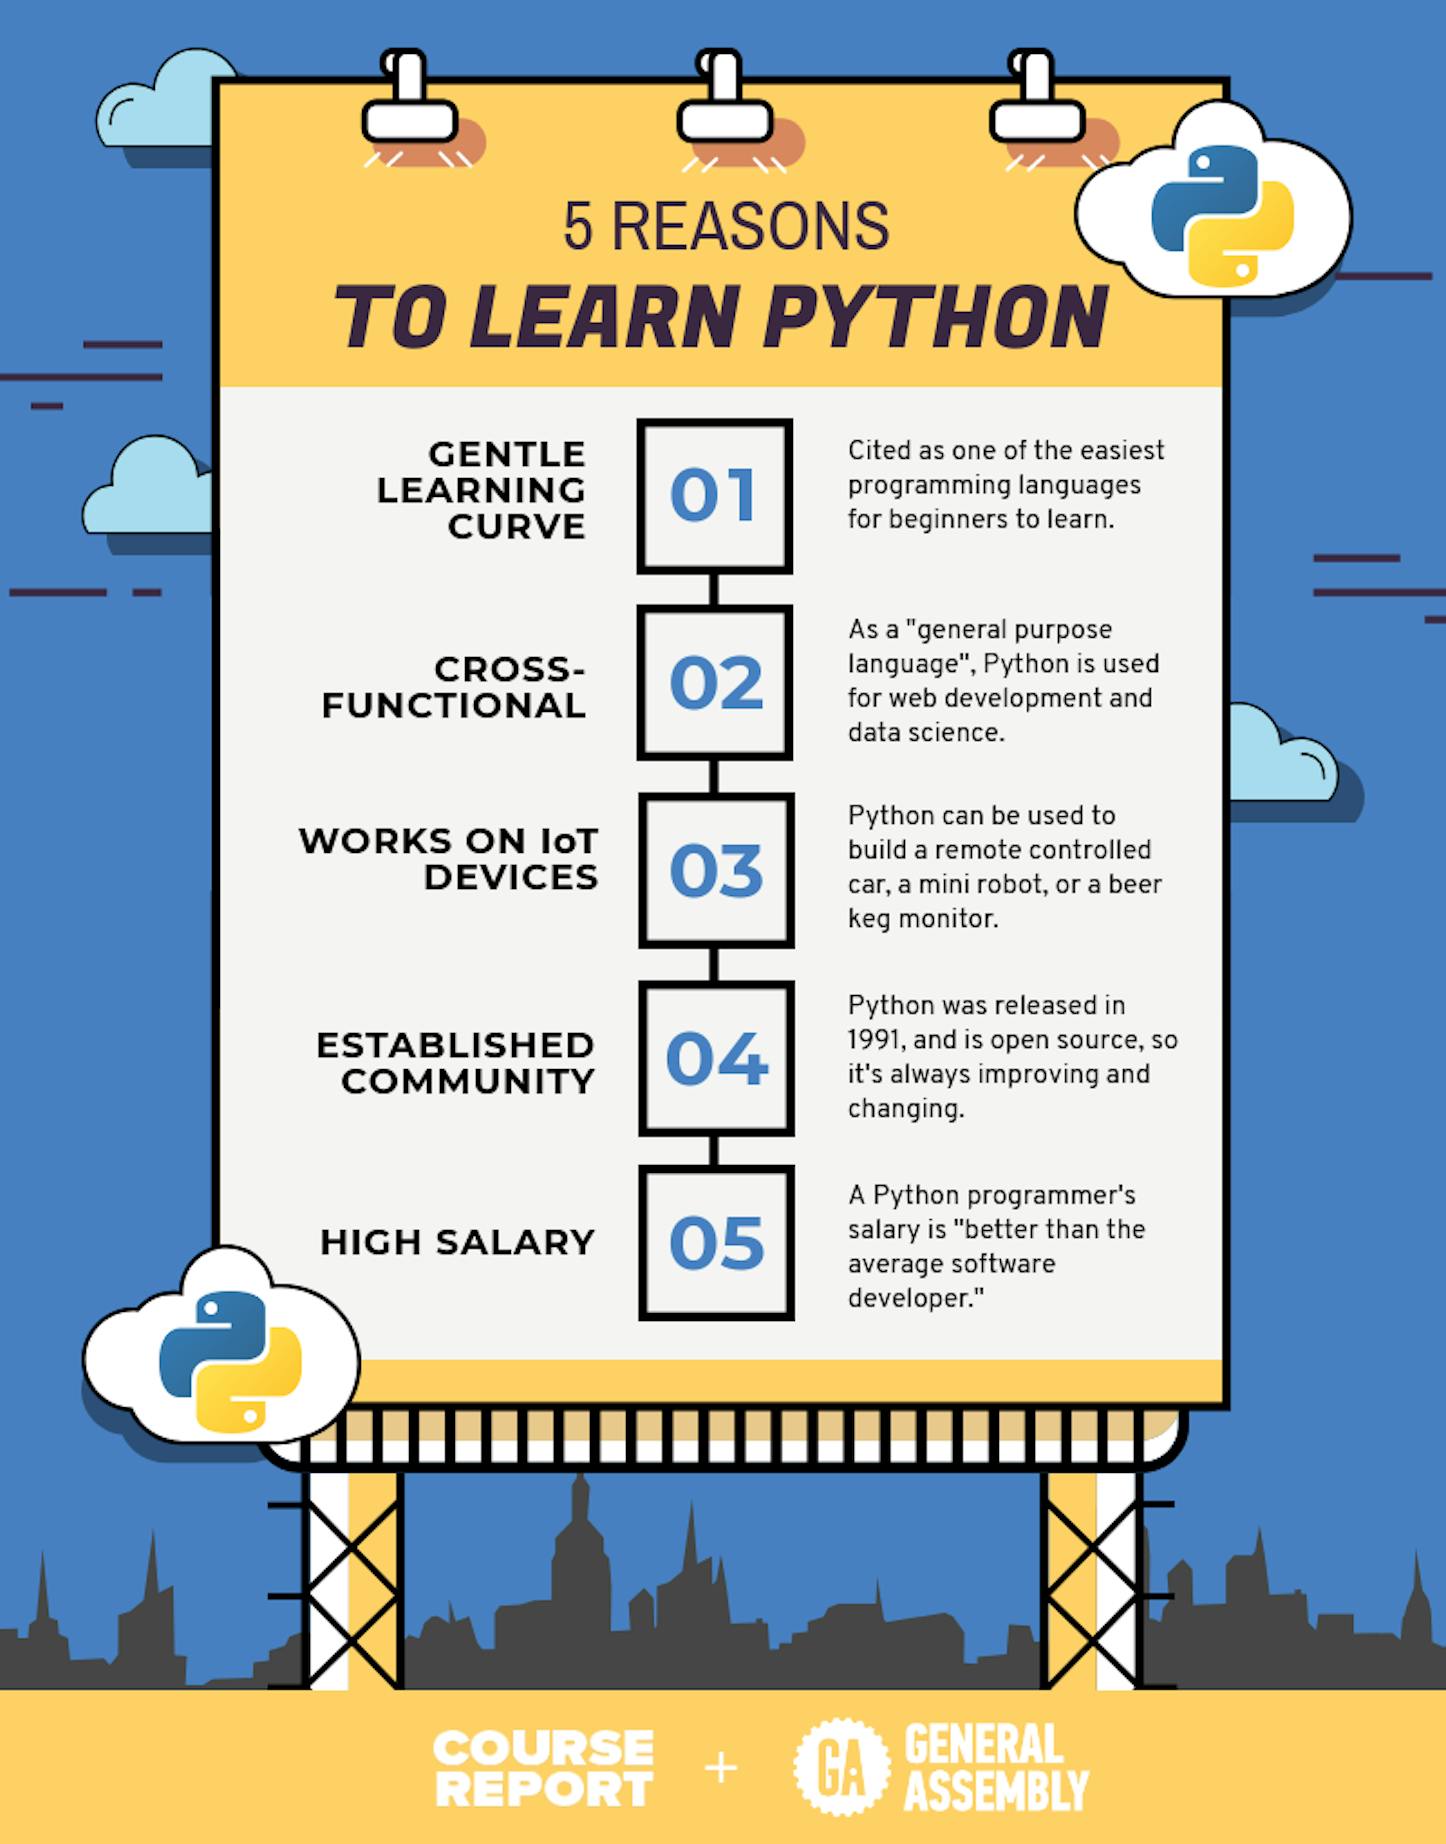 5 Reasons to Learn Python Course Report